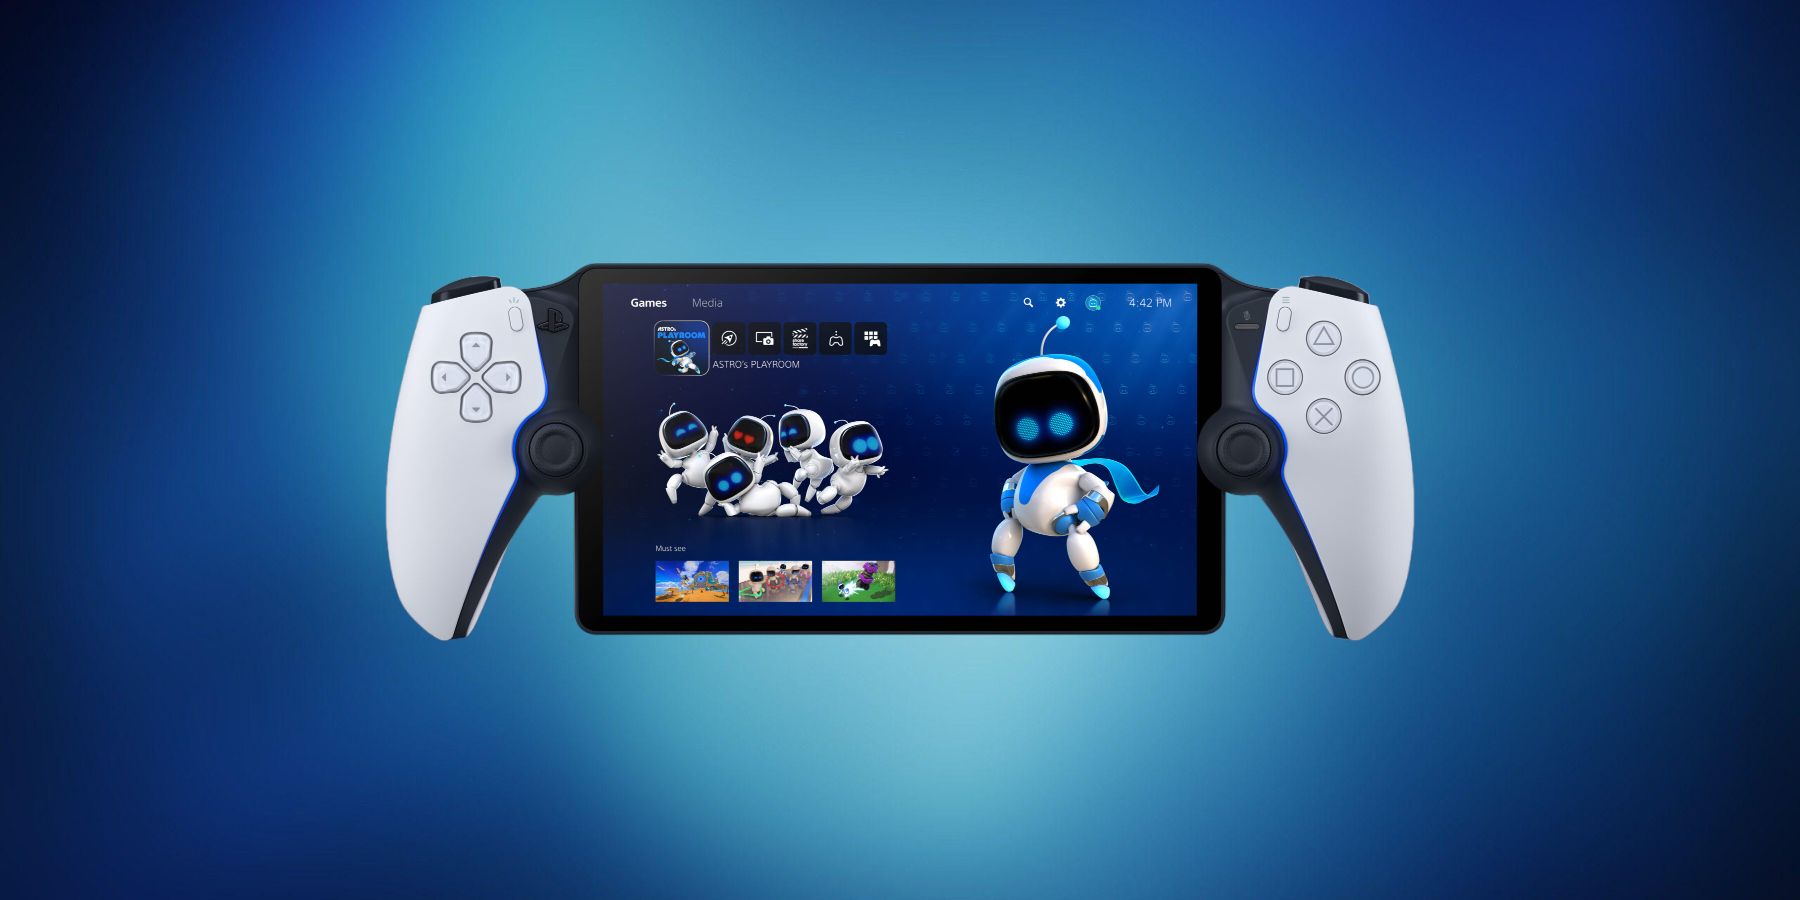 Price of PlayStation 5 handheld device revealed